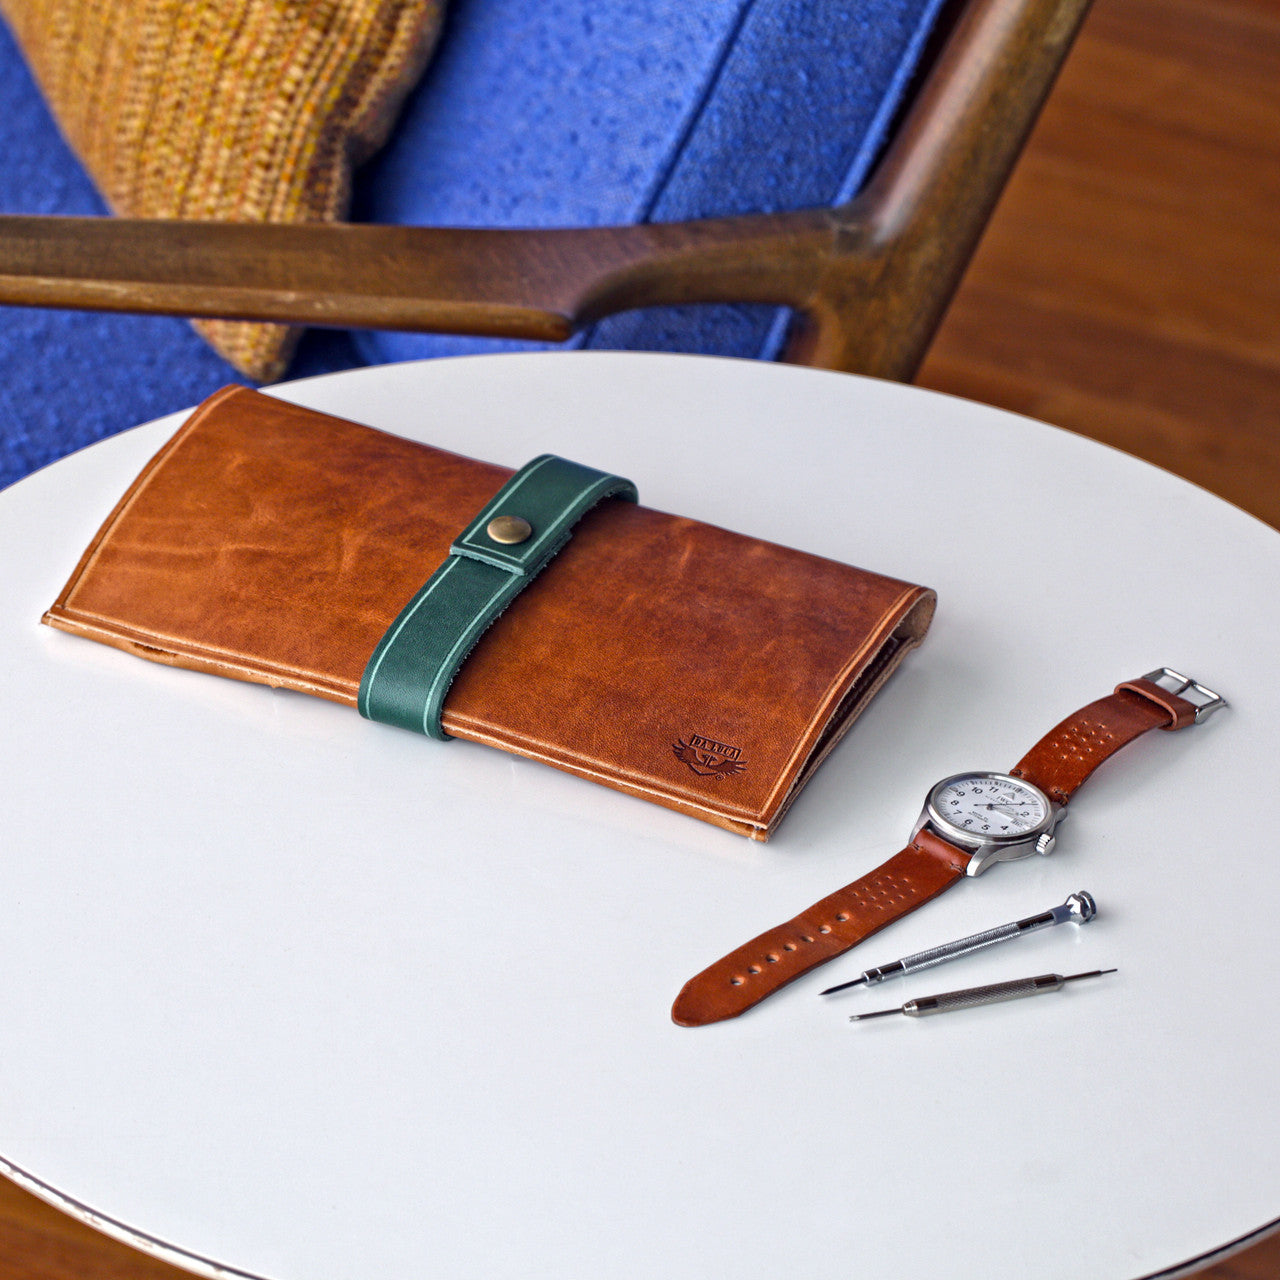 A Handmade Travel Watch Case From Genuine Horween Natural Dublin Leather By DaLuca Straps.